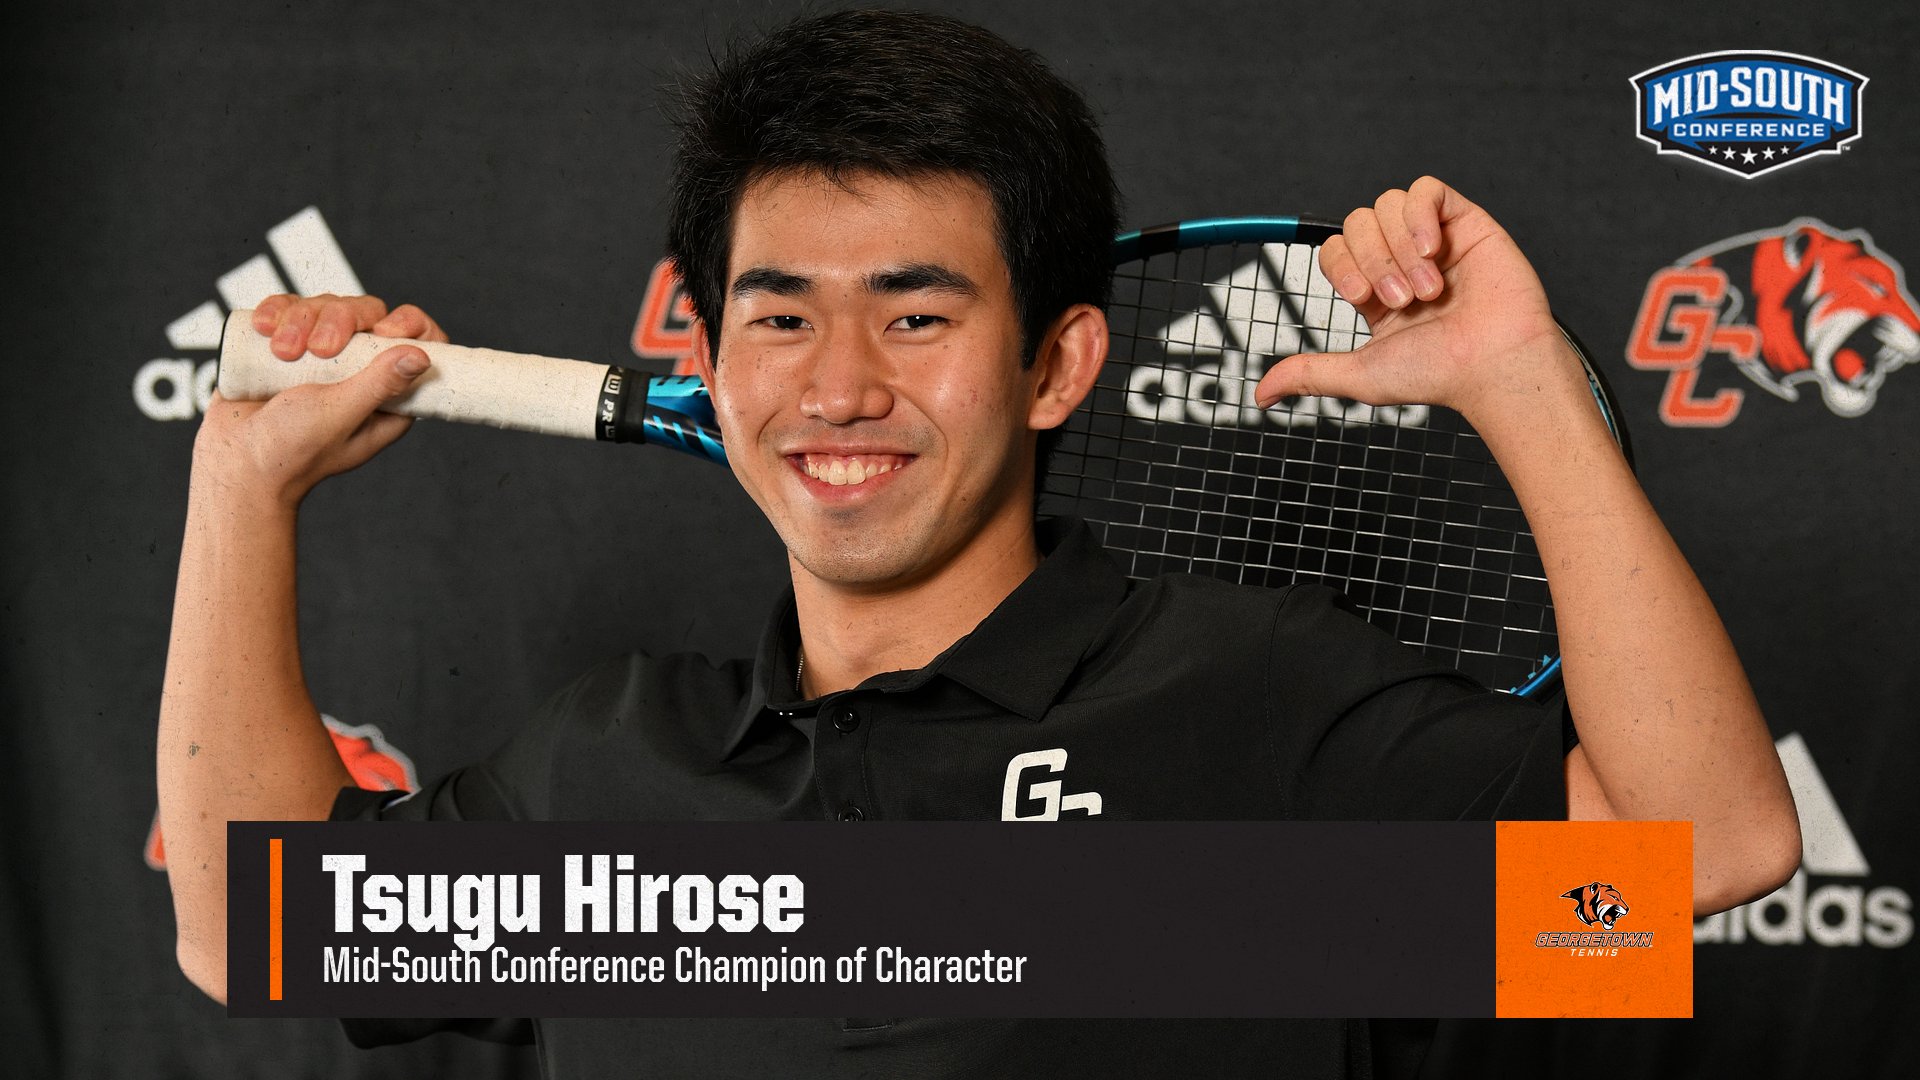 Hirose named MSC Champion of Character